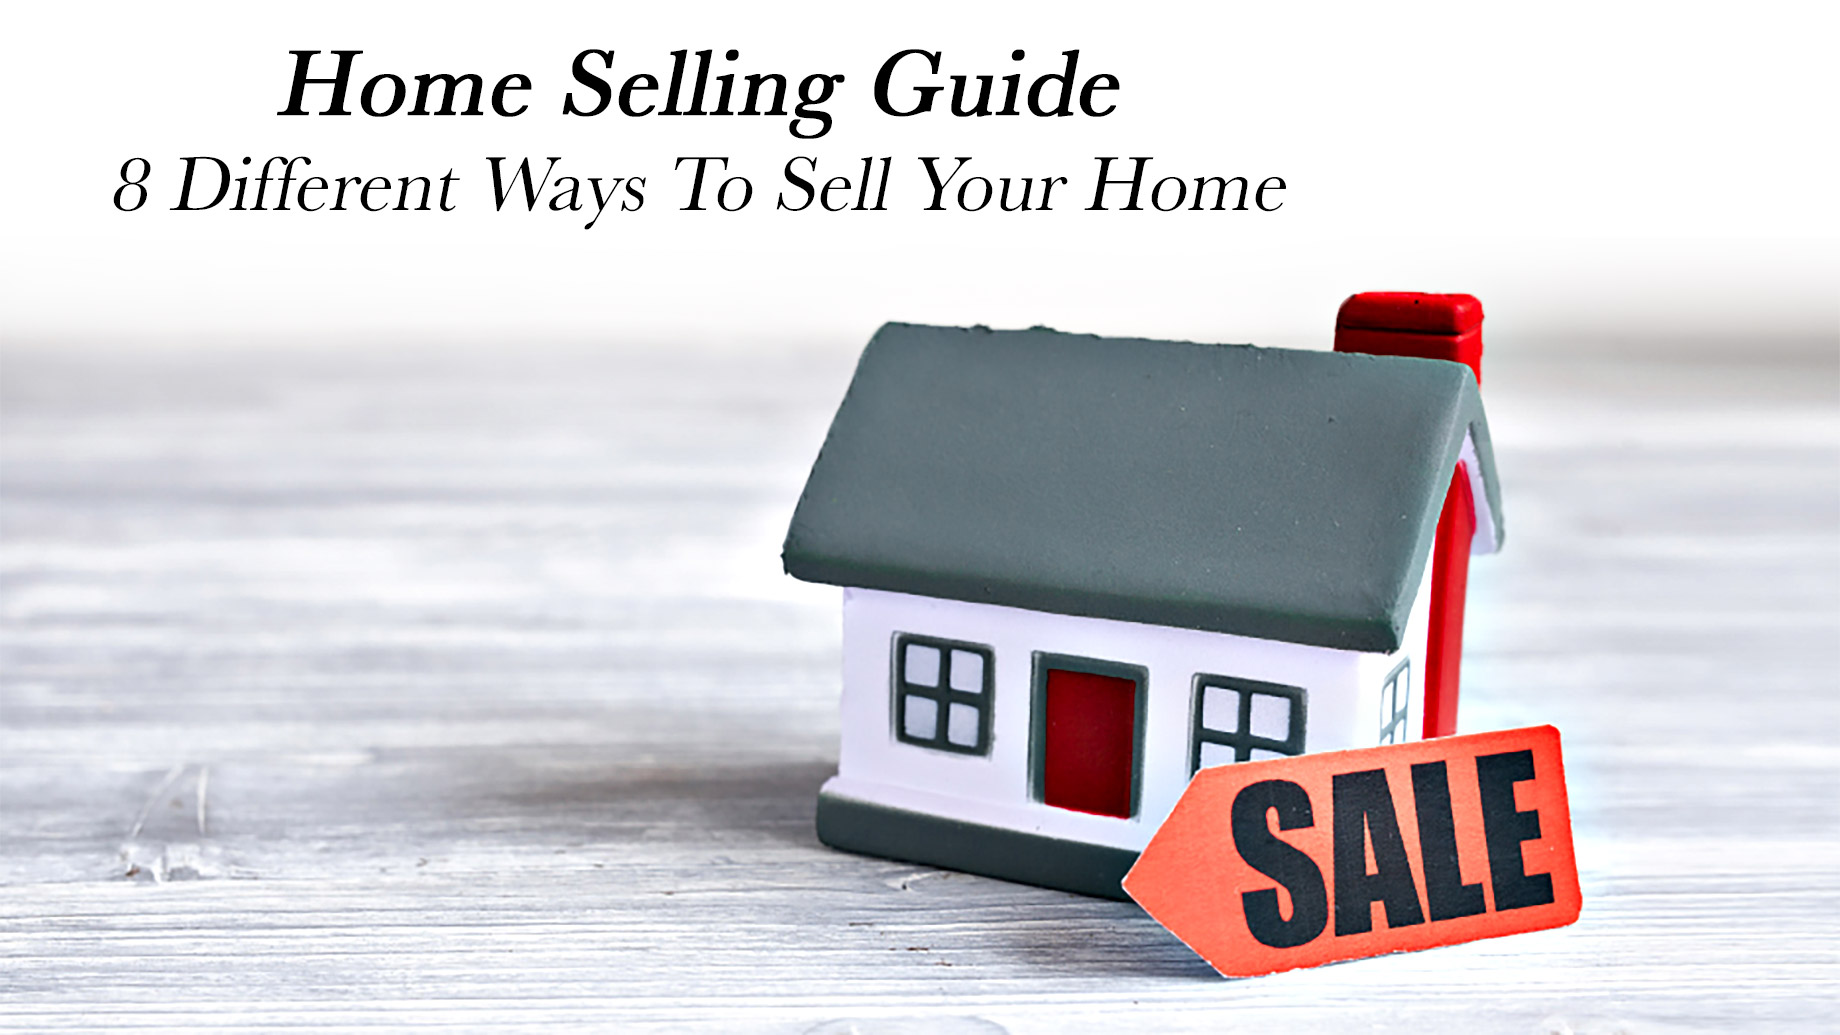 Home Selling Guide - 8 Different Ways To Sell Your Home